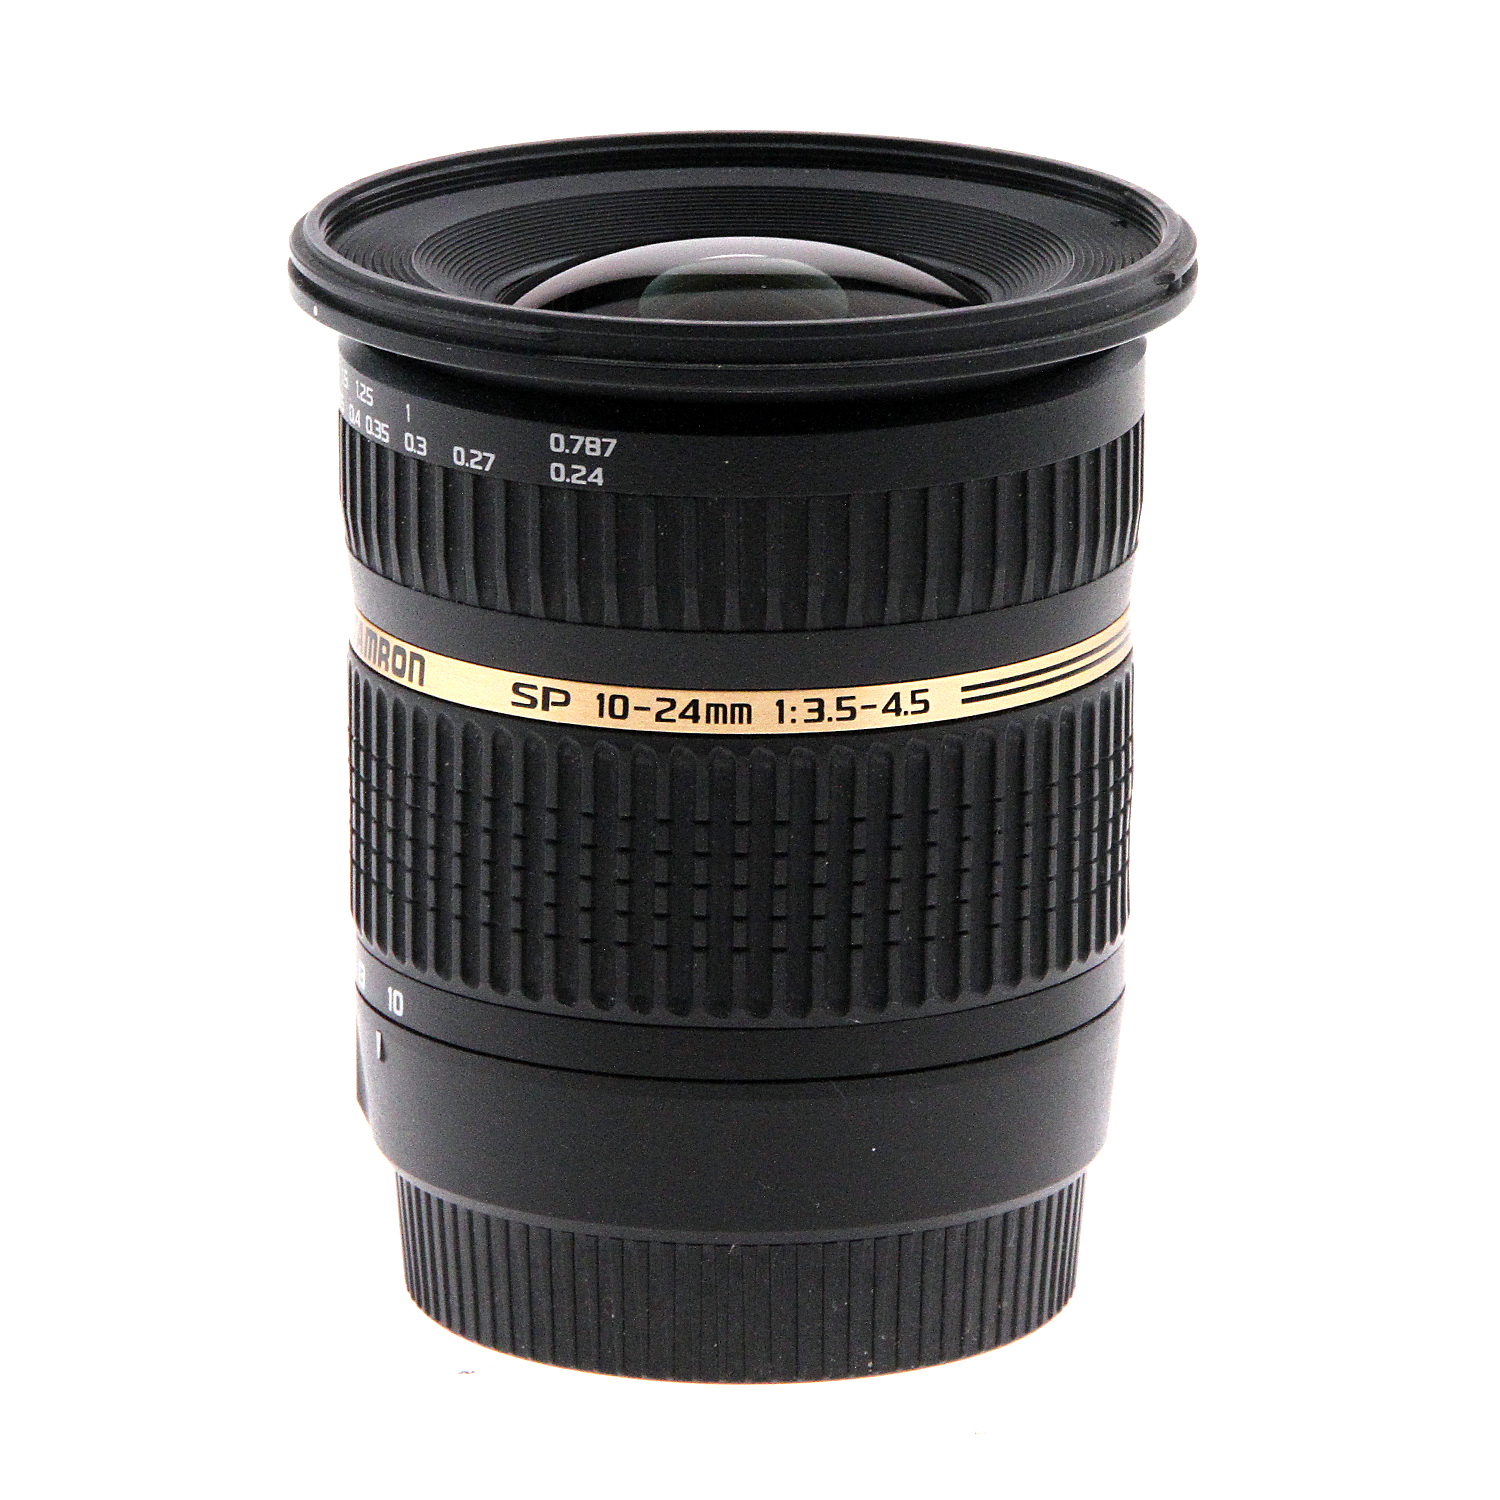 Tamron Sp 10 24mm F3 5 4 5 Di Ii Ld Aspherical If Lens For Canon Open Box Afb001c700